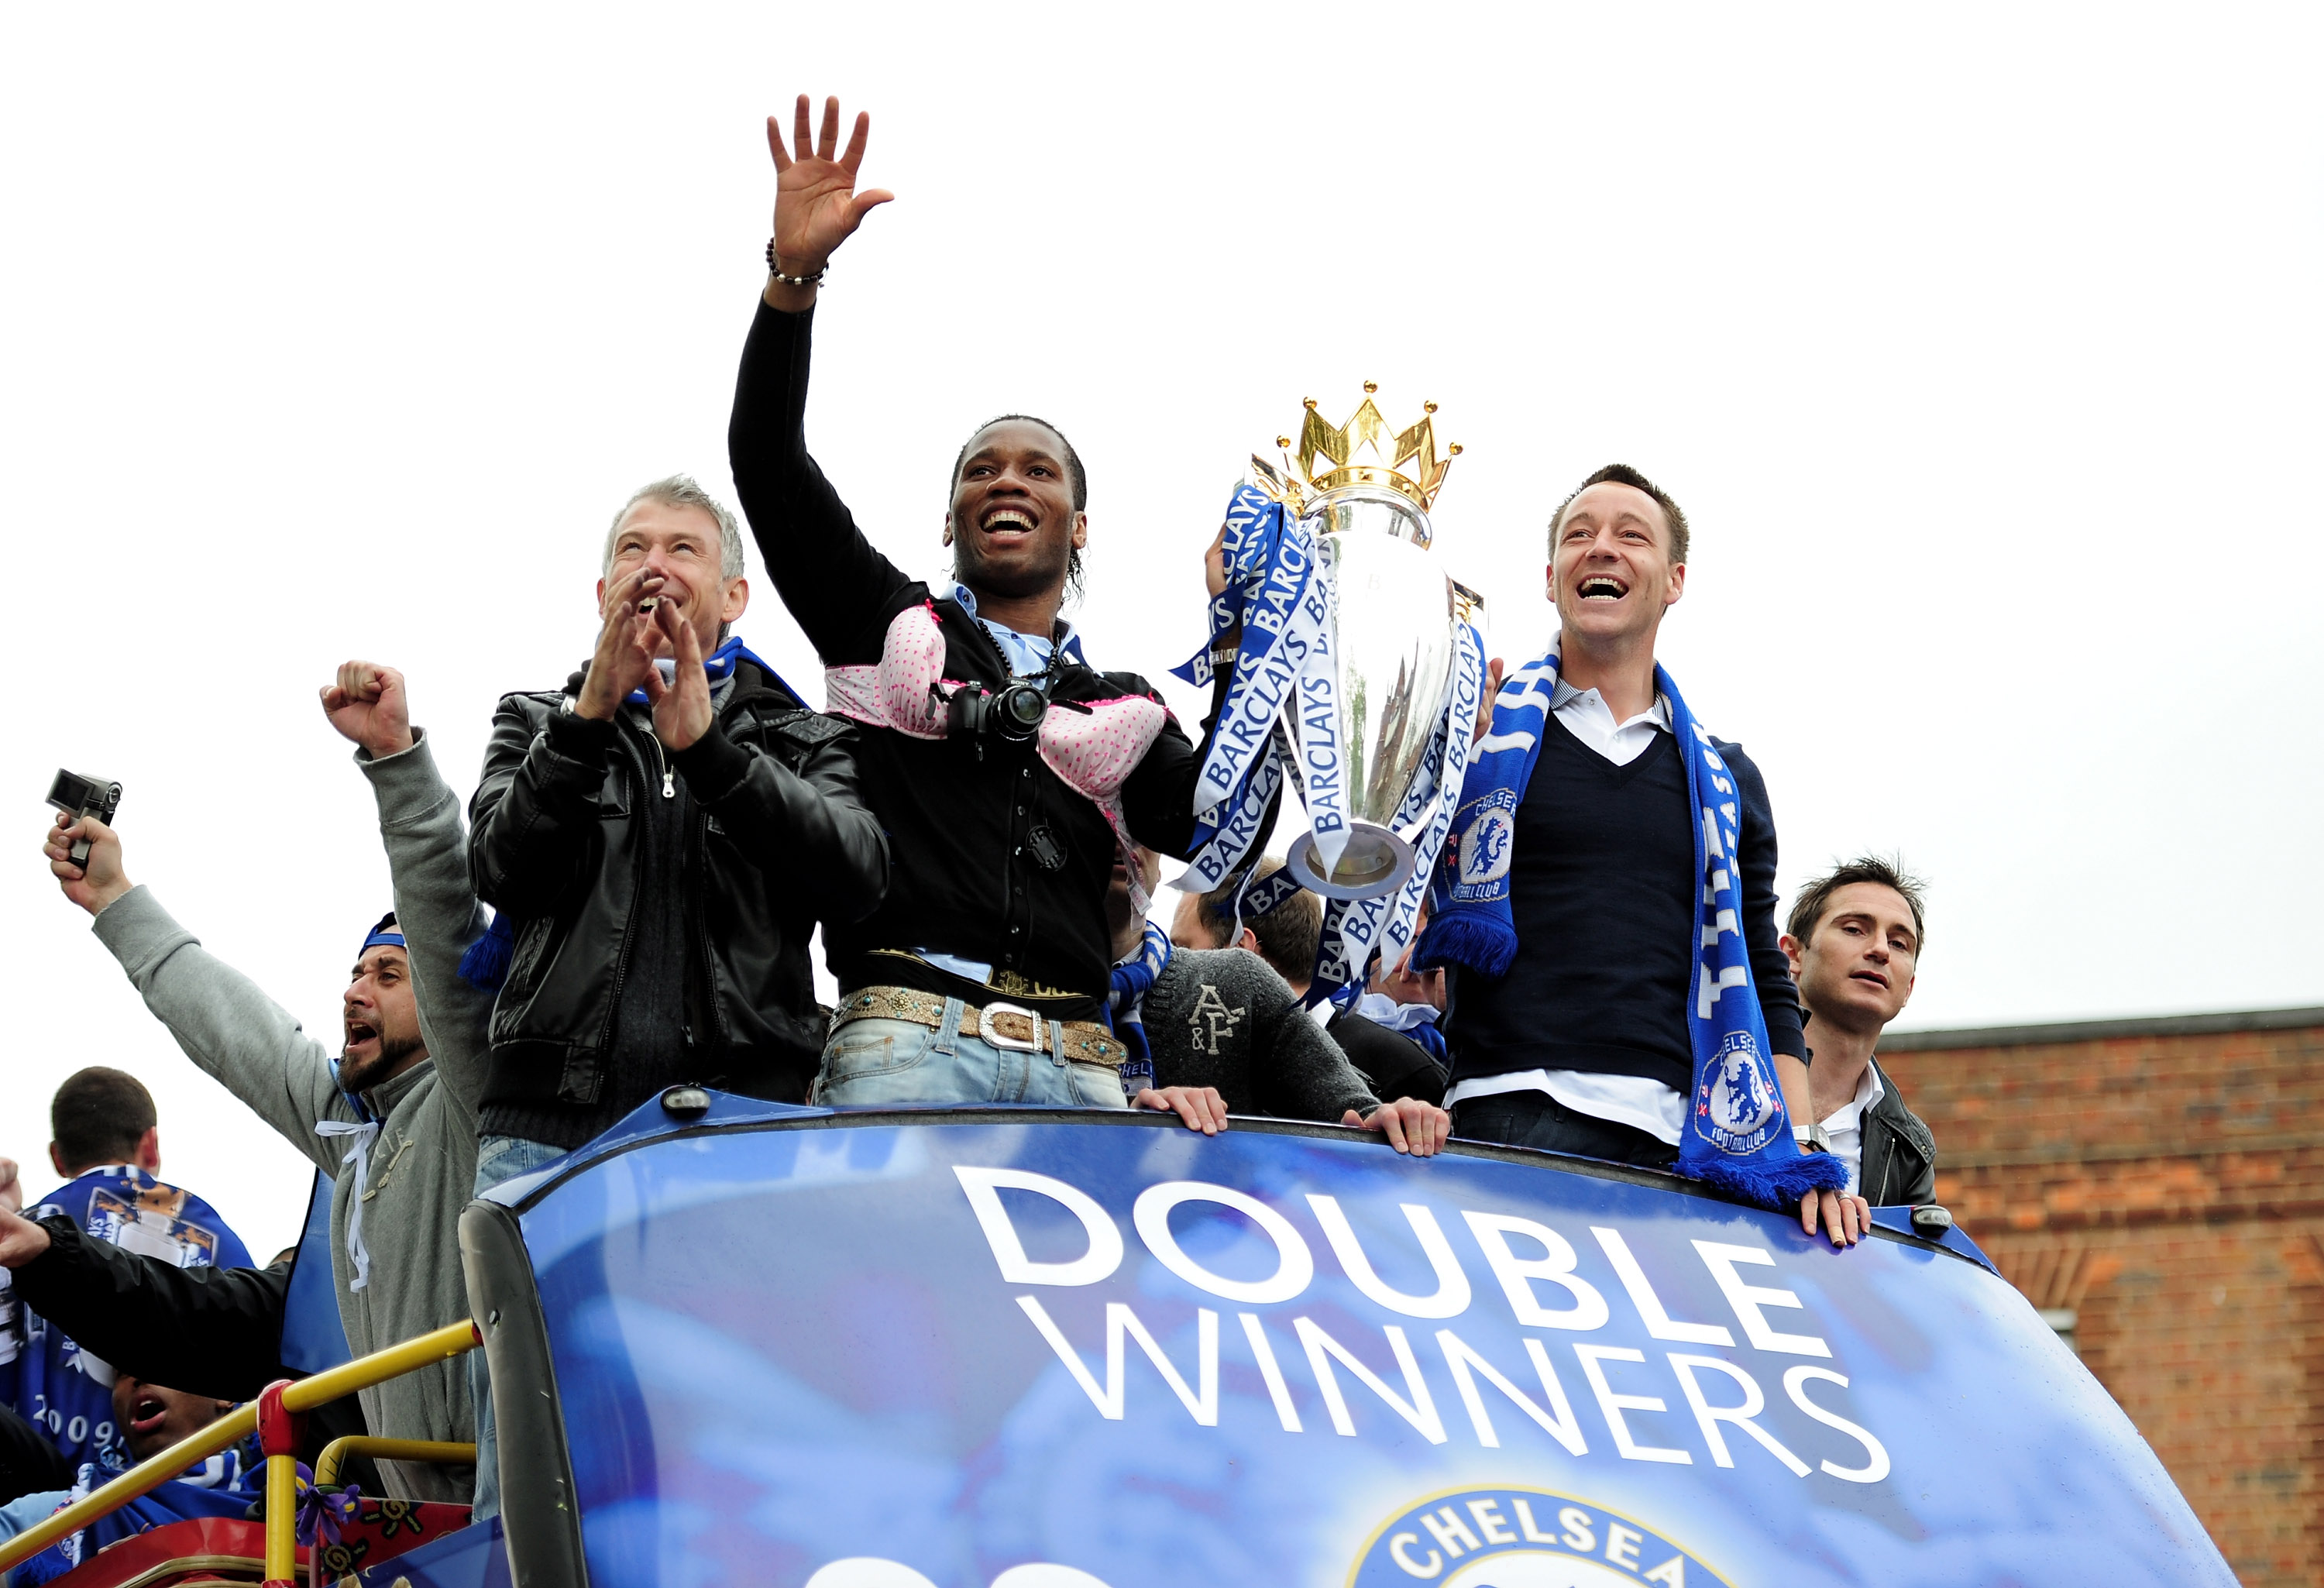 LONDON, ENGLAND - MAY 16:  Chelsea captain John Terry and Didier Drogba celebrate with the Premier League Trophy during the Chelsea FC Victory Parade on May 16, 2010 in London, England.  (Photo by Shaun Botterill/Getty Images)